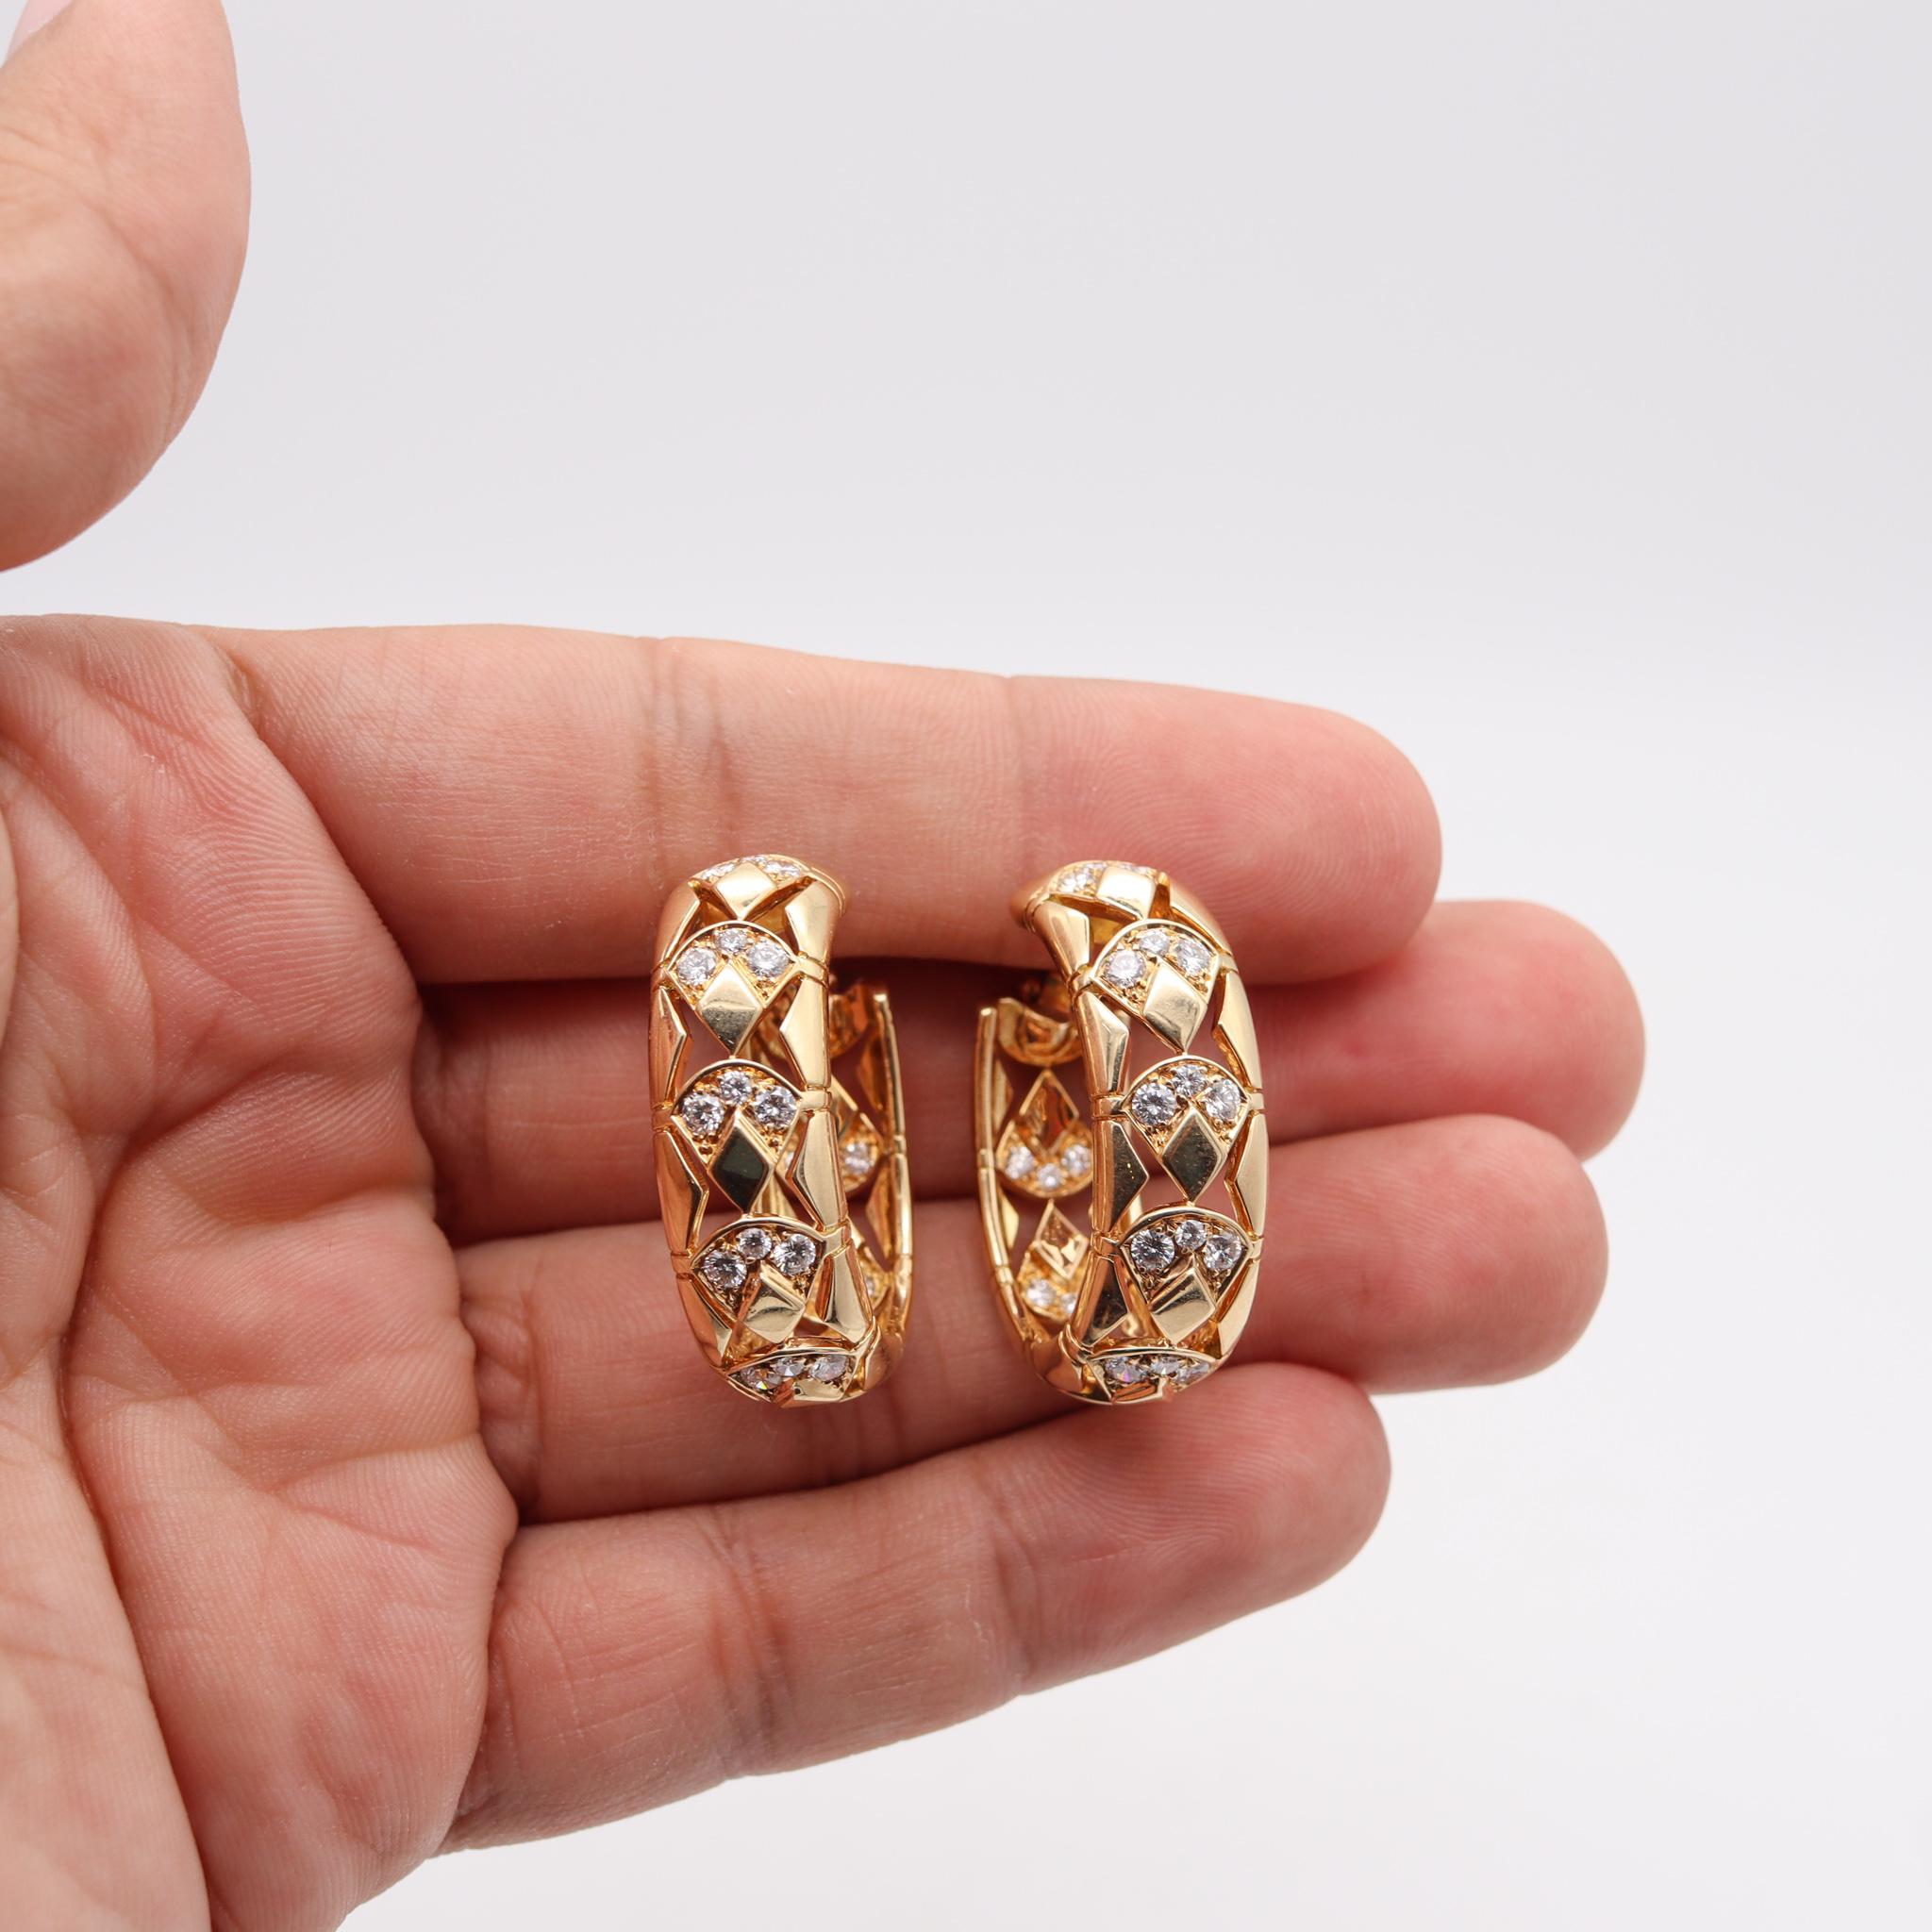 Cartier Paris Oval Hoops Earrings in 18Kt Yellow Gold with 2.84 Cts VVS Diamonds For Sale 1